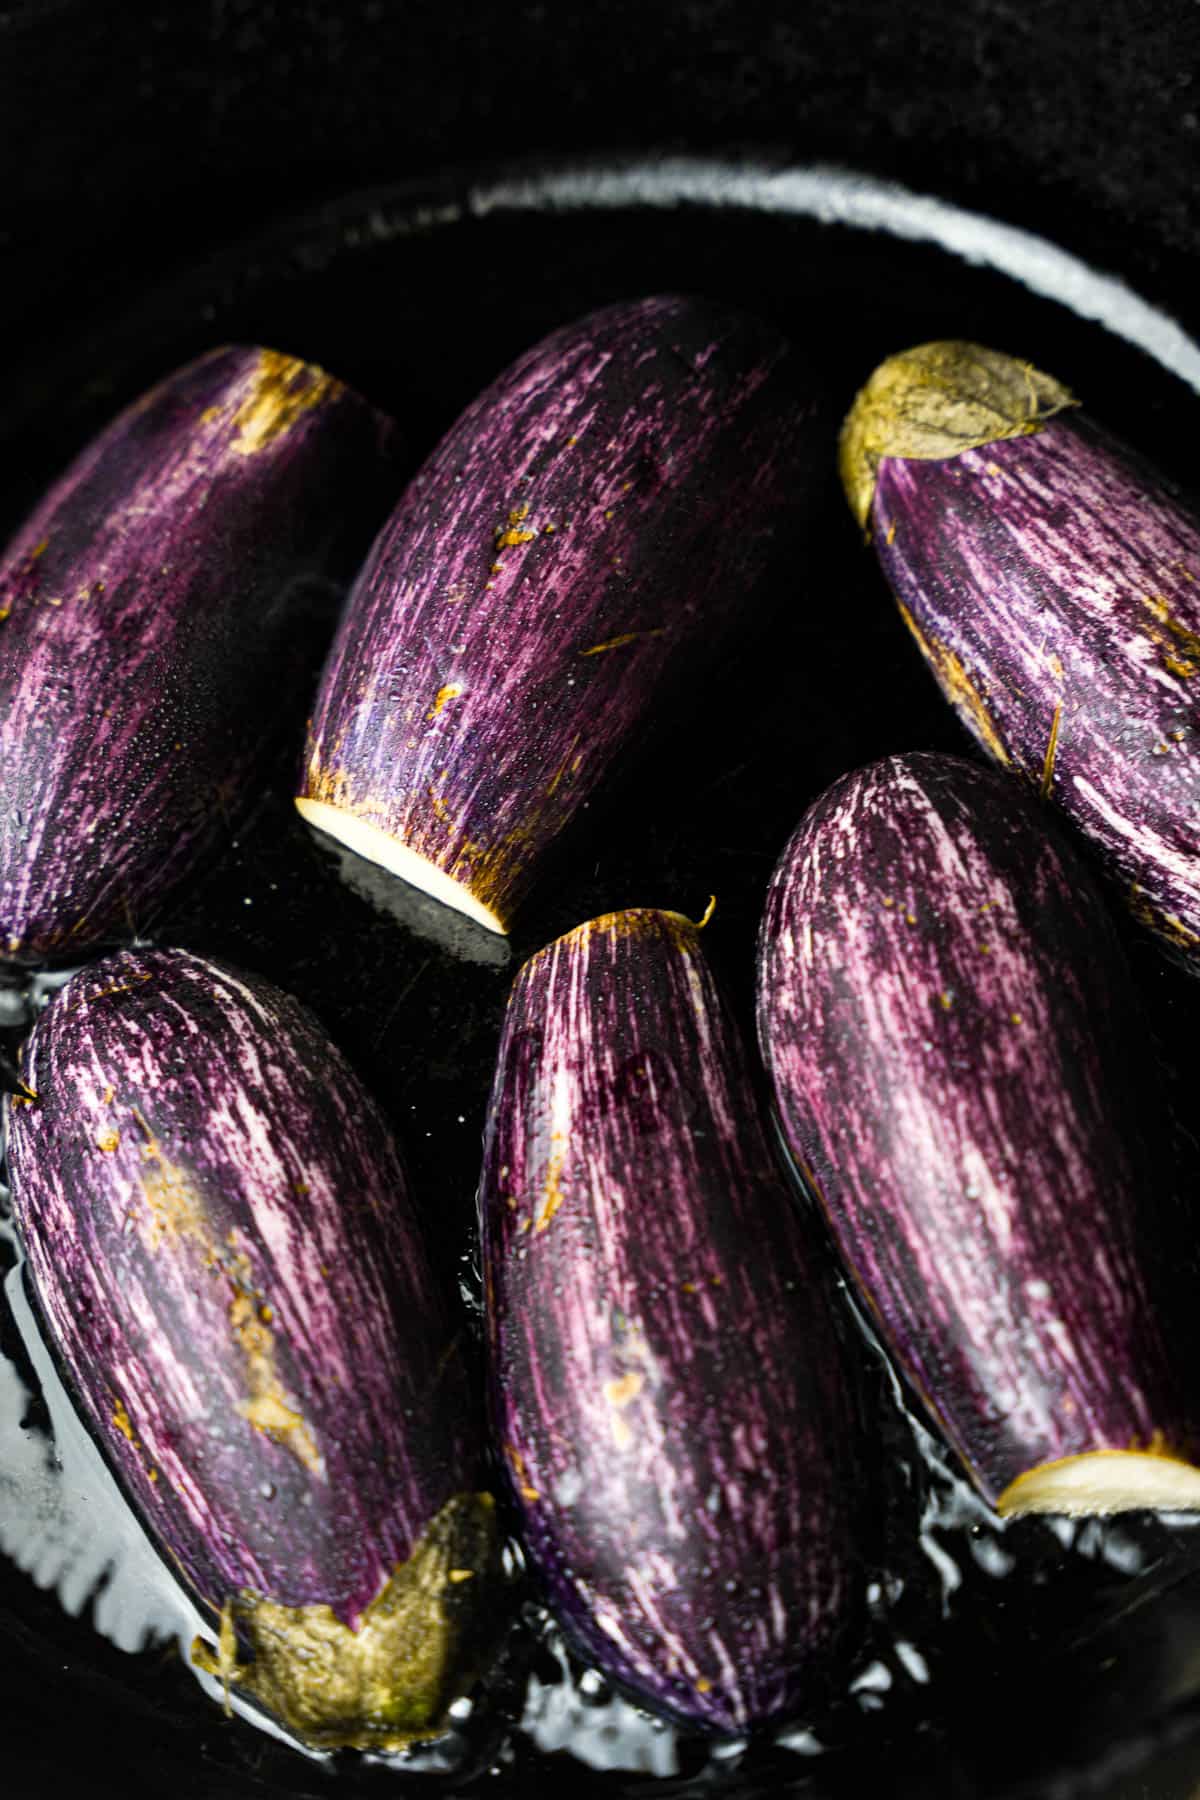 eggplants cooking cut side down in hot oil in a pan on a stove top.